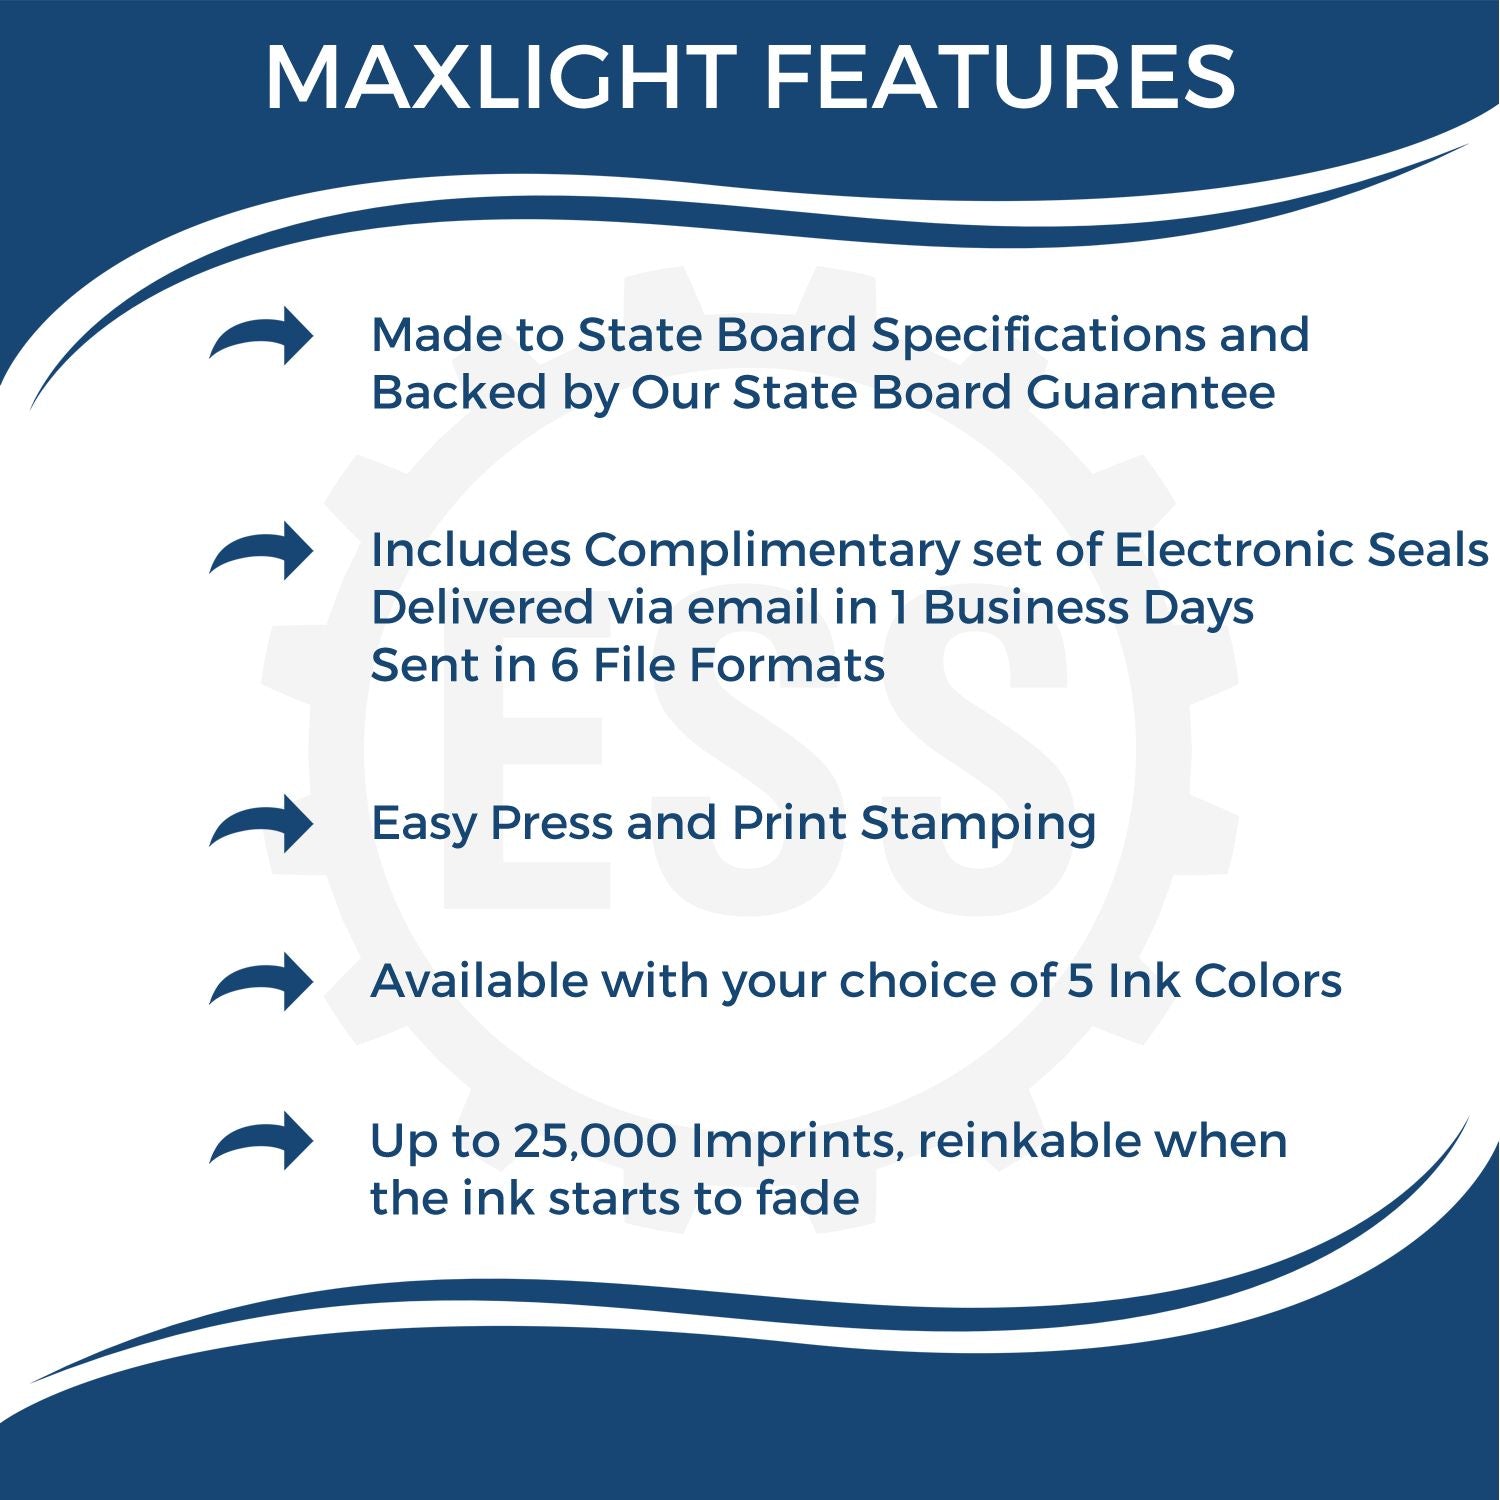 A picture of an infographic highlighting the selling points for the Premium MaxLight Pre-Inked Michigan Landscape Architectural Stamp